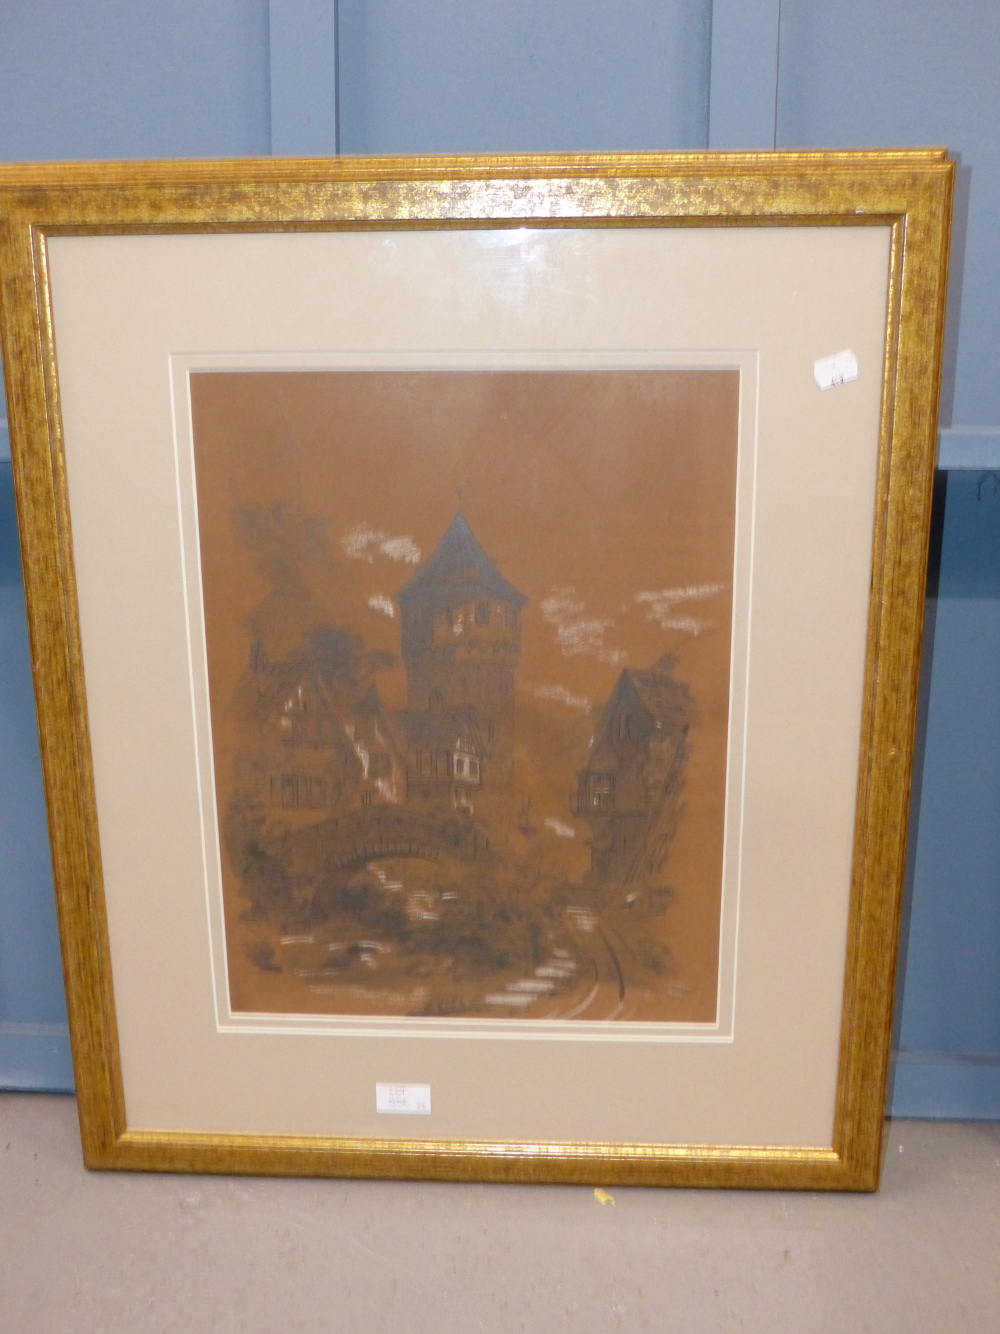 E. STEED (?) (19TH CENTURY), A PAIR OF VIEWS OF CONTINENTAL BUILDINGS, INDISTINCTLY SIGNED, DATED - Image 2 of 4